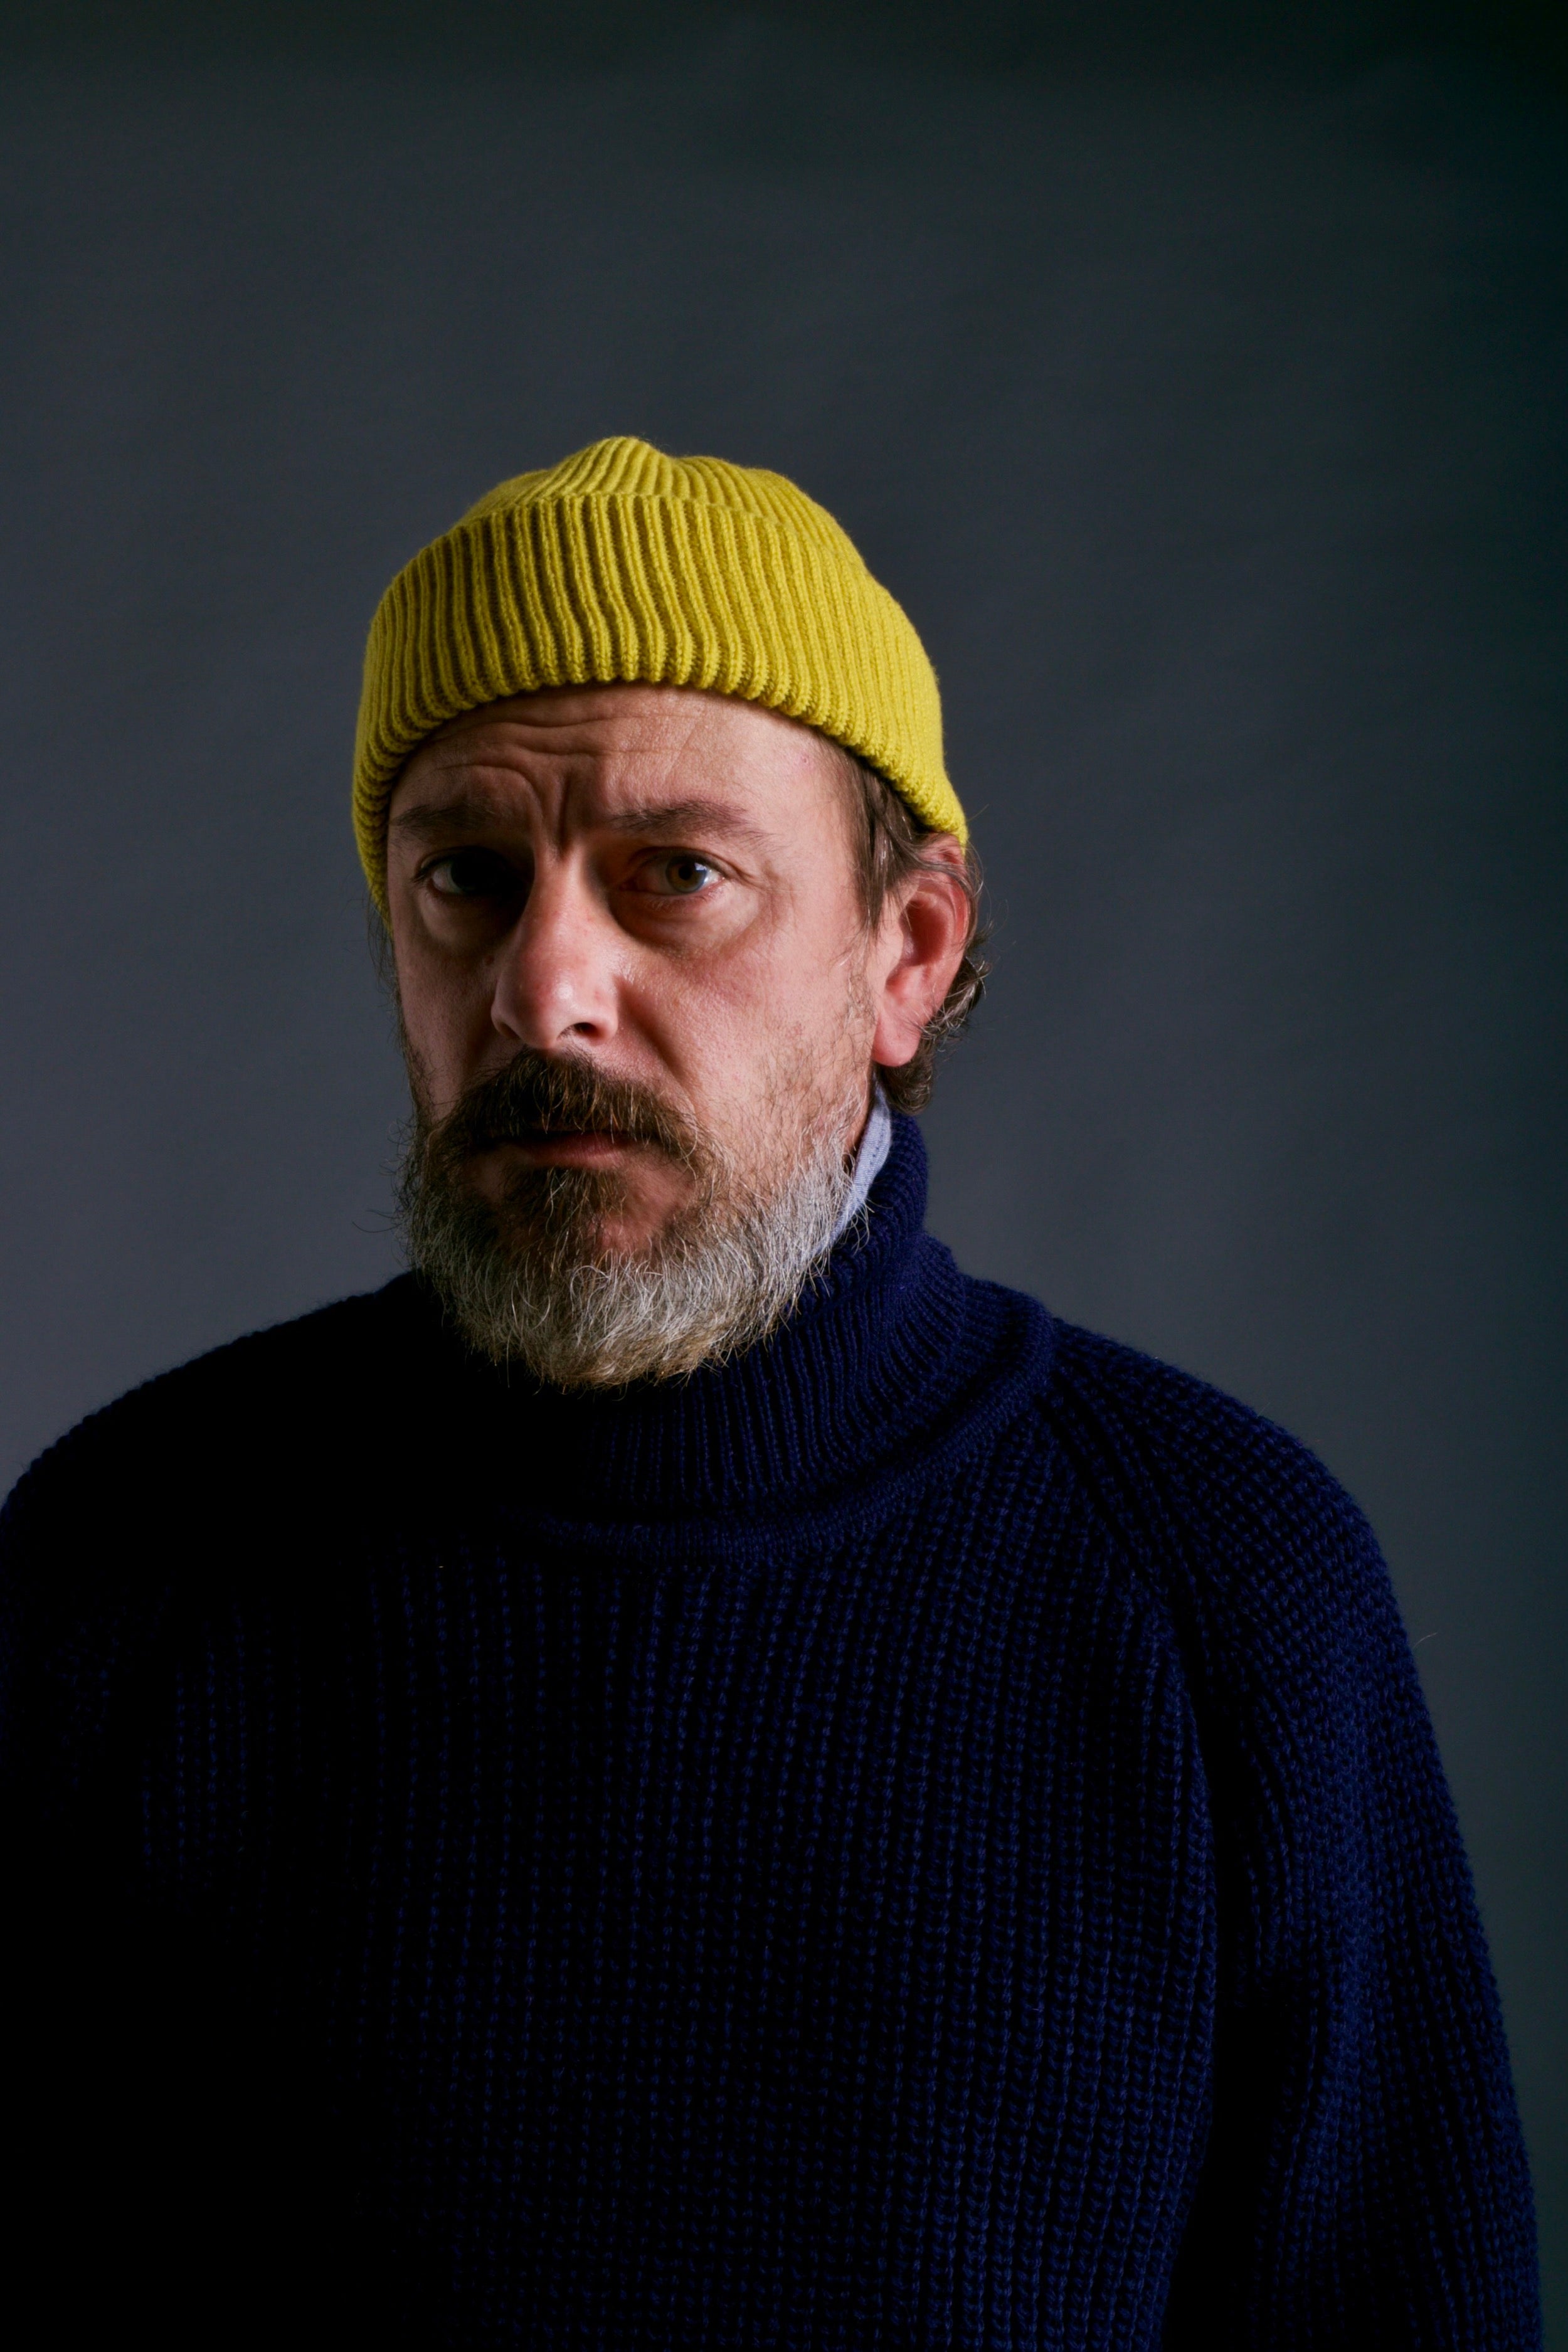 Man wears Carrier Company Yellow Wool Hat and Fisherman's Jumper